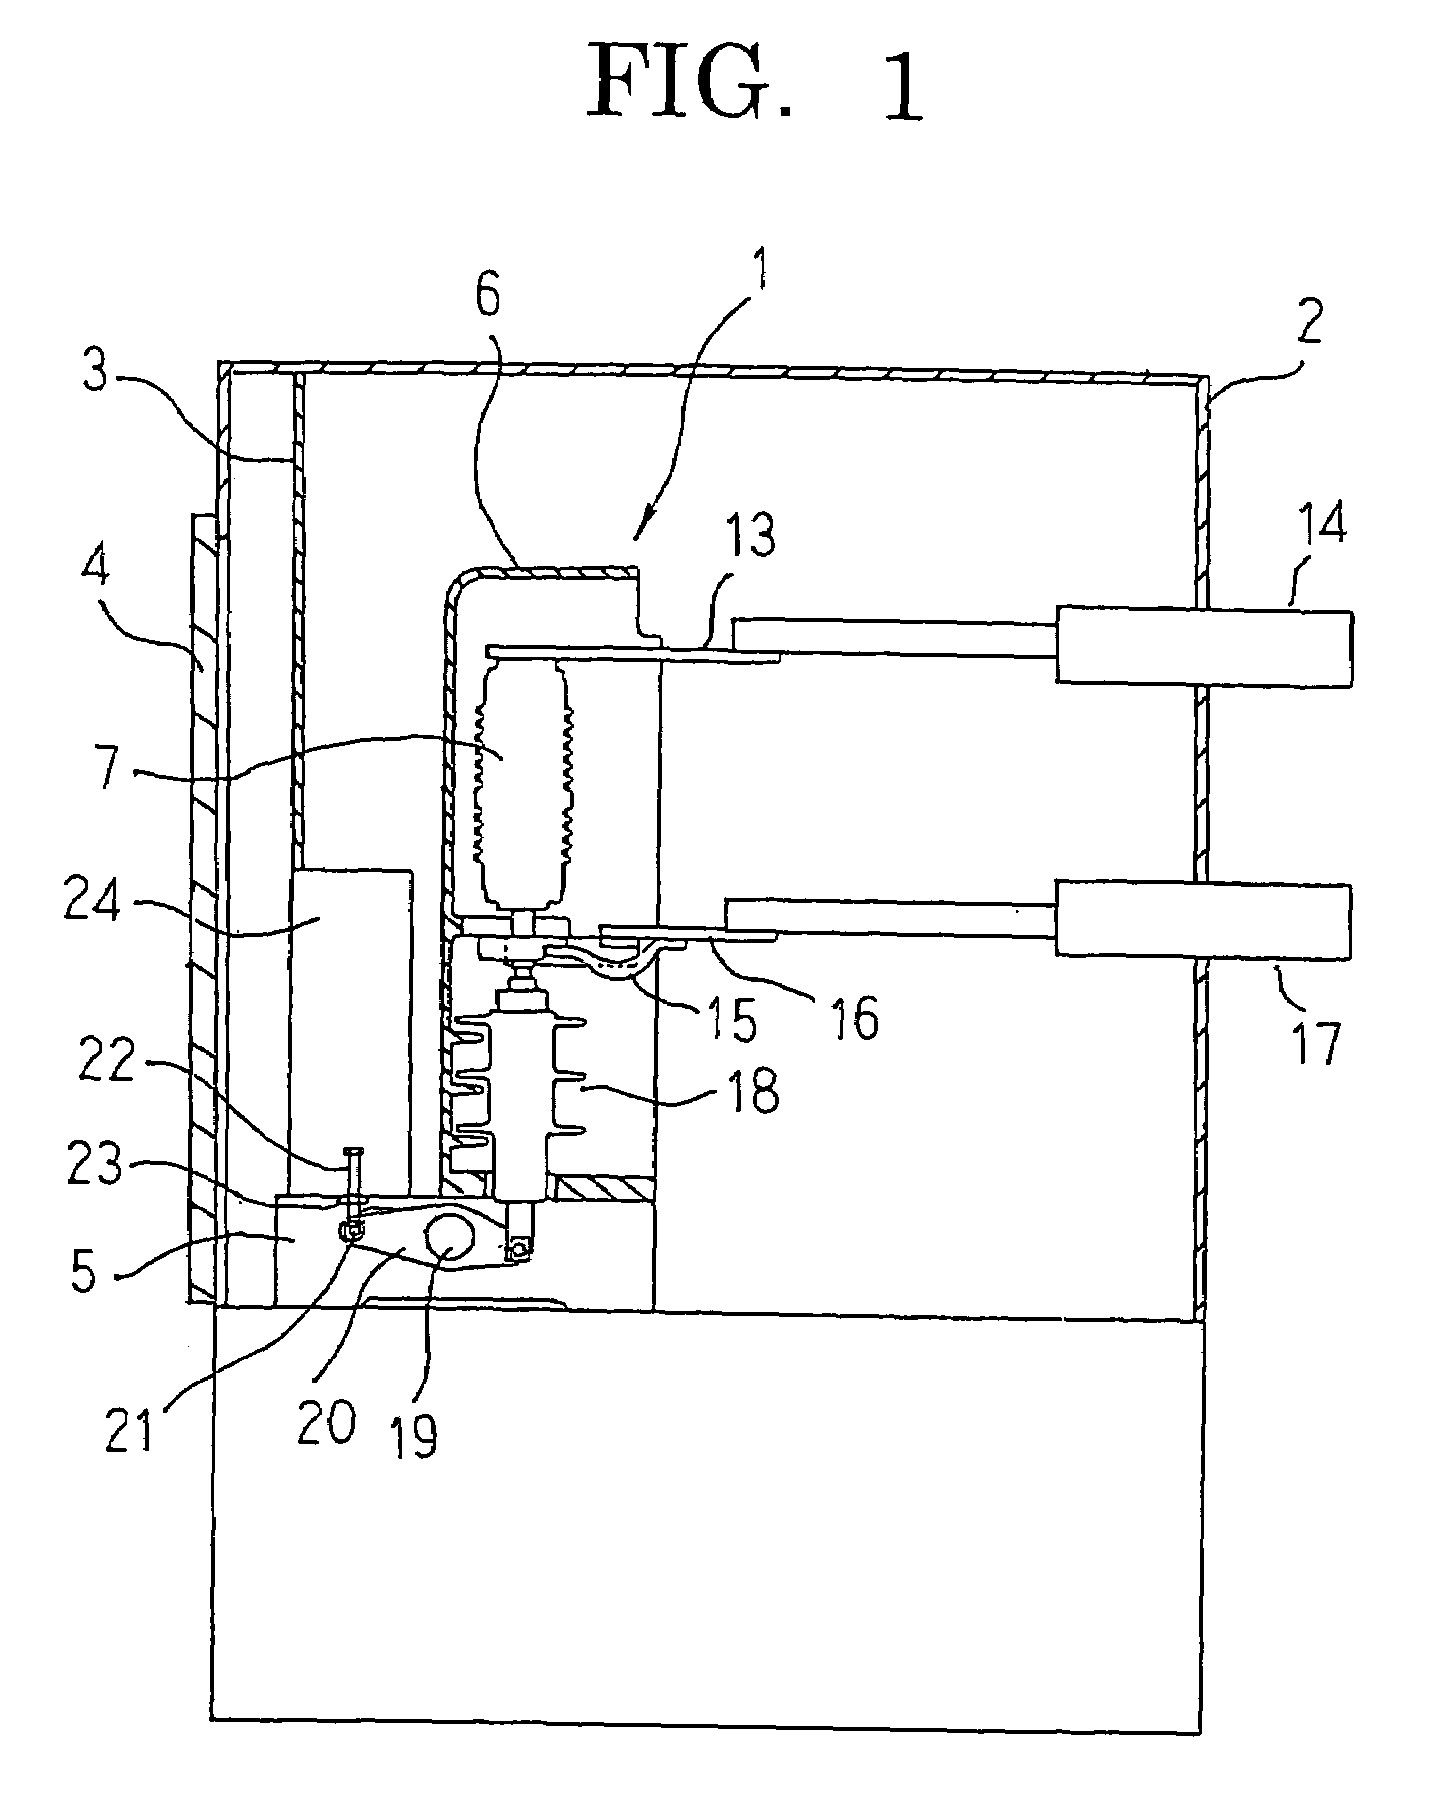 Vacuum circuit breaker, vacuum circuit breaker contact slow closing method, and contact erosion measuring method and contact gap length setting method using that slow closing method